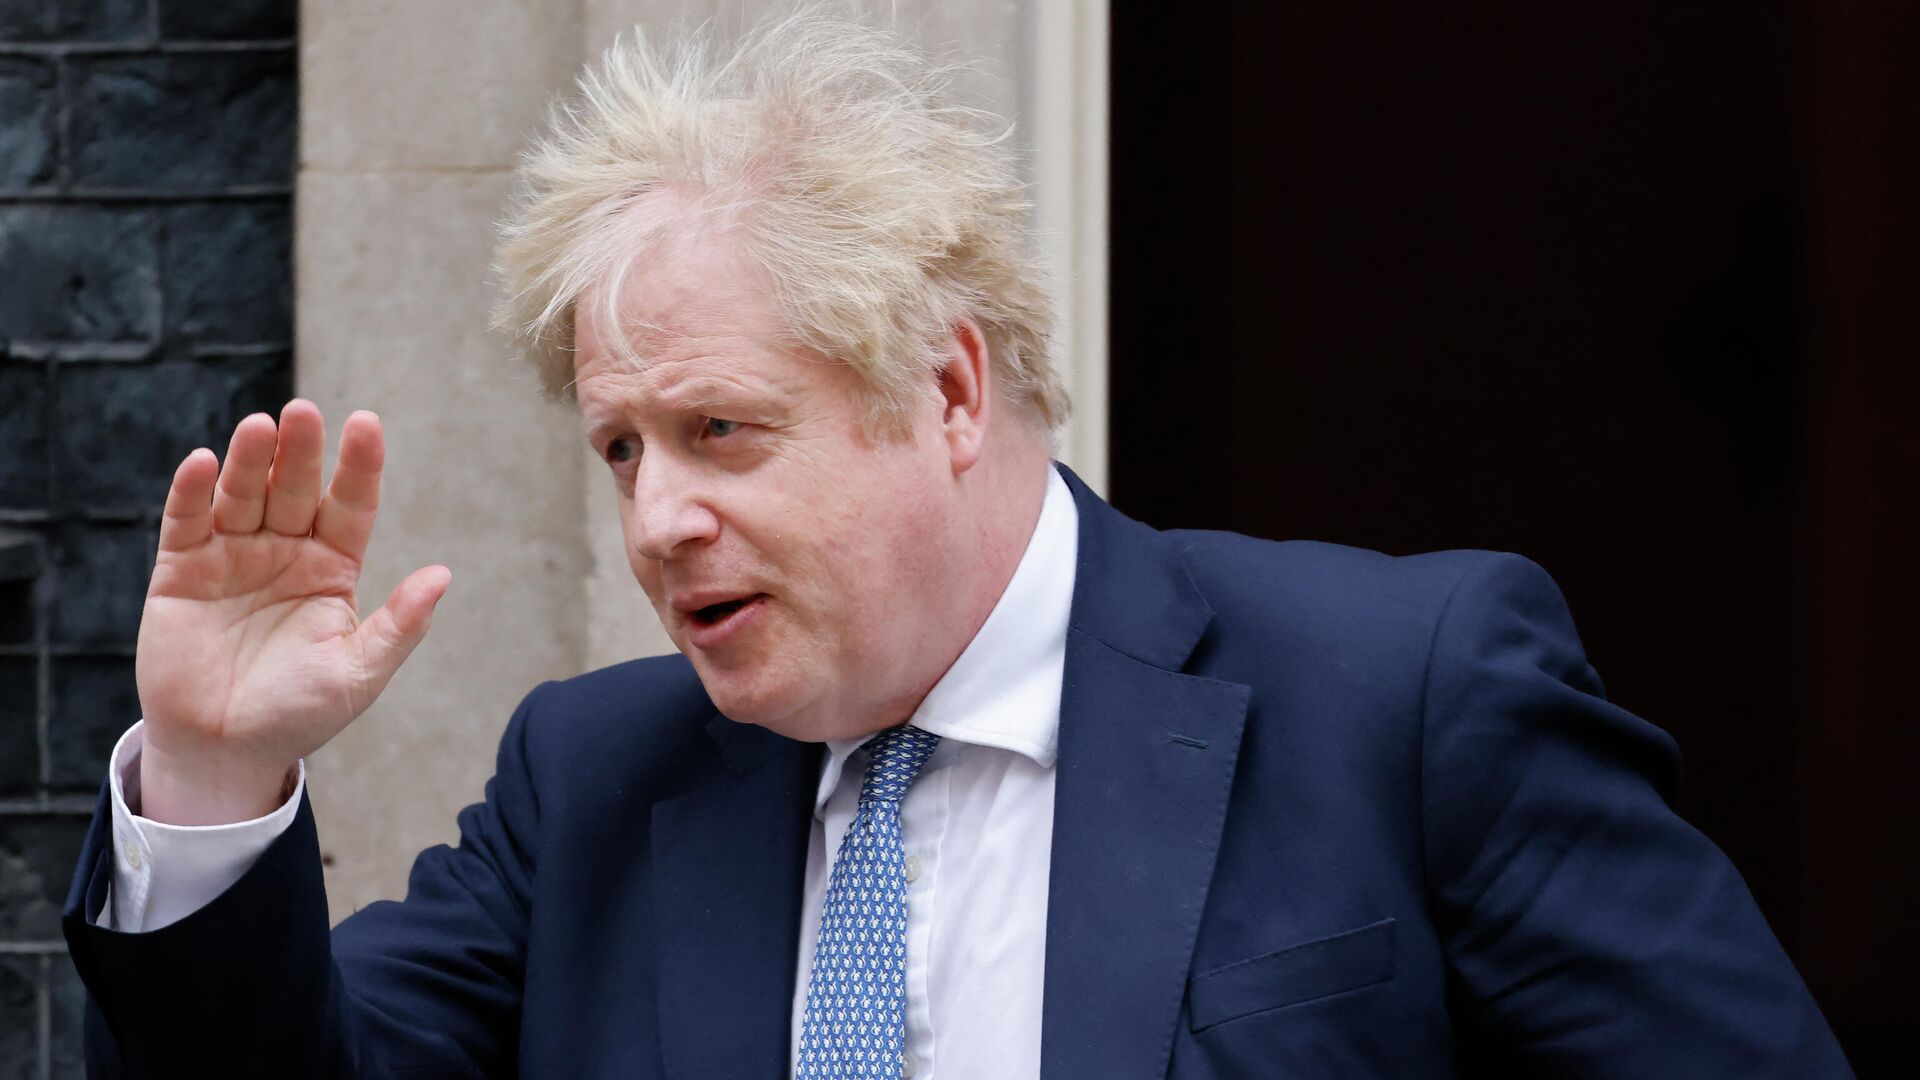 Britain's Prime Minister Boris Johnson waves as he leaves from 10 Downing Street in central London on February 2, 2022 to take part in the weekly session of Prime Minister's Questions (PMQs) at the House of Commons. - Sputnik International, 1920, 16.03.2022